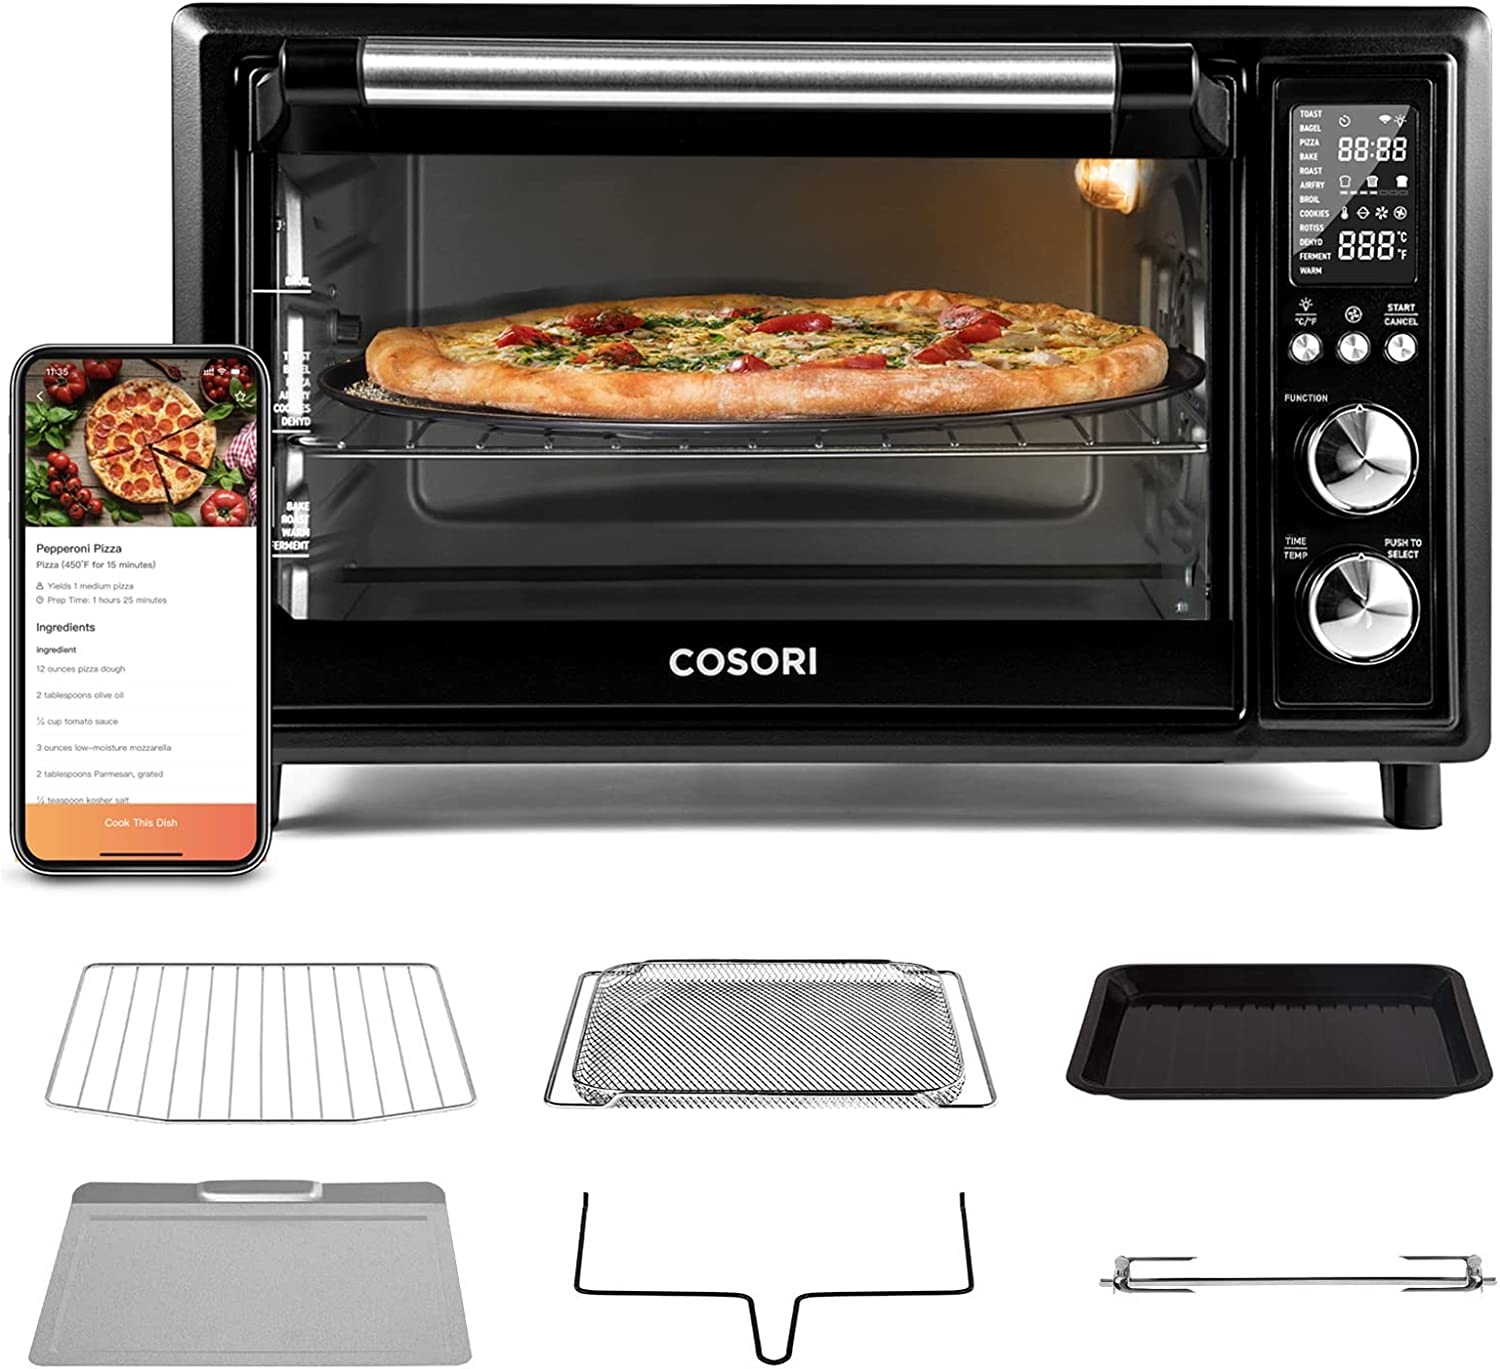 COSORI Air Fryer Toaster Oven, 12-in-1 Convection Oven Countertop with Rotisserie, Stainless Steel 32QT/32L, 6-Slice Toast,